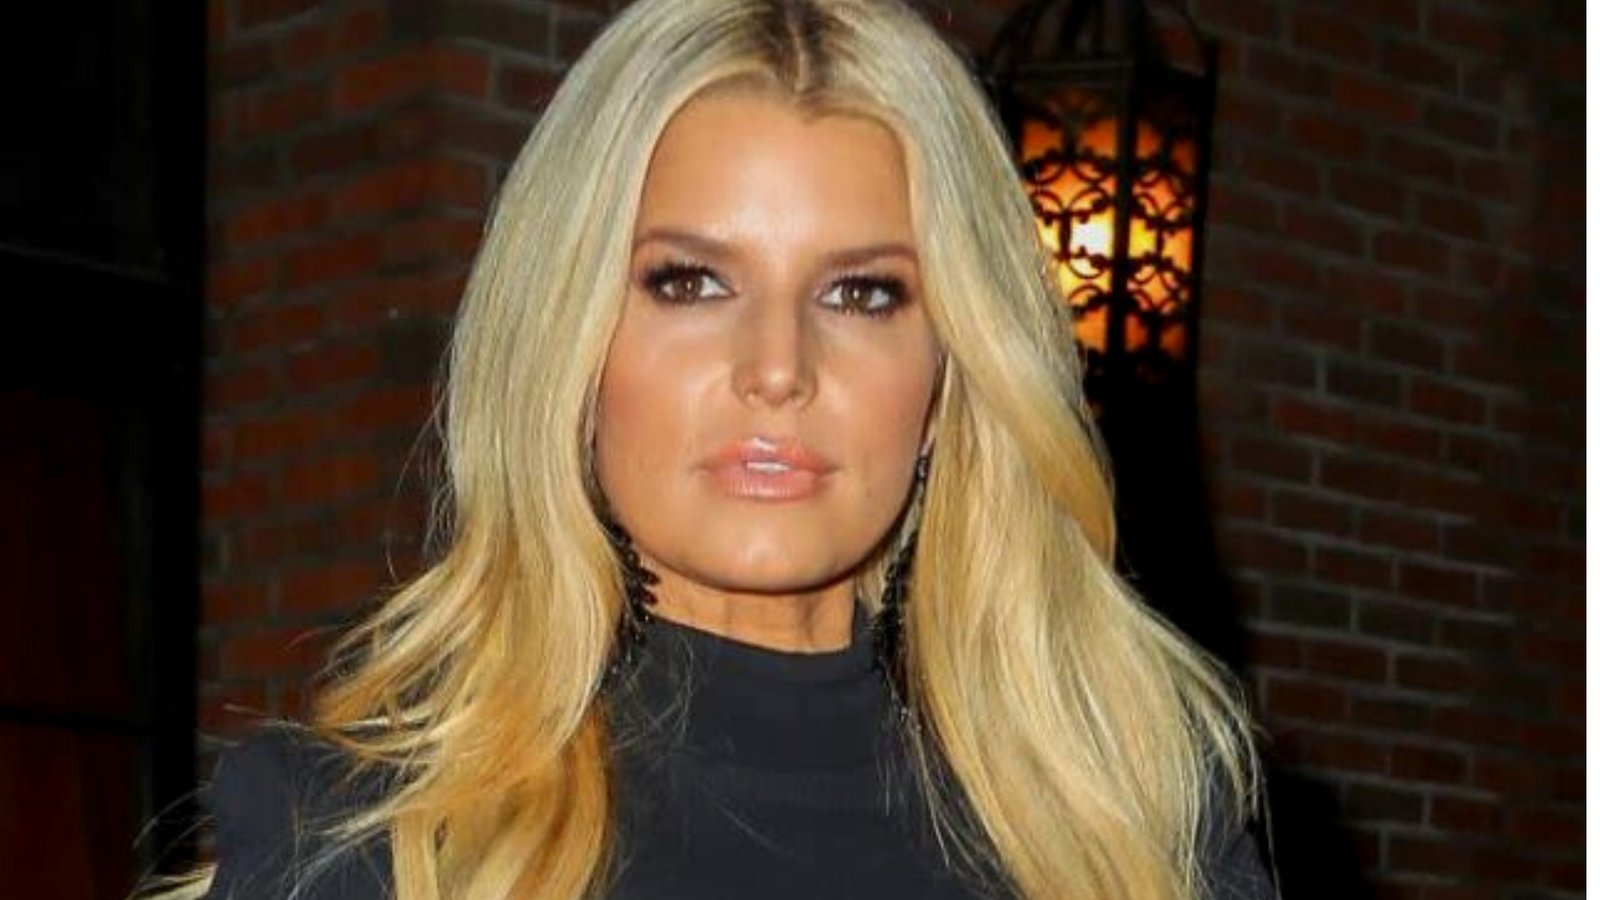 Know-More-About-Jessica-Simpson-Net-Worth-Marital-Status-Age-Salary-And-Career-All-Publicly-Available-Information